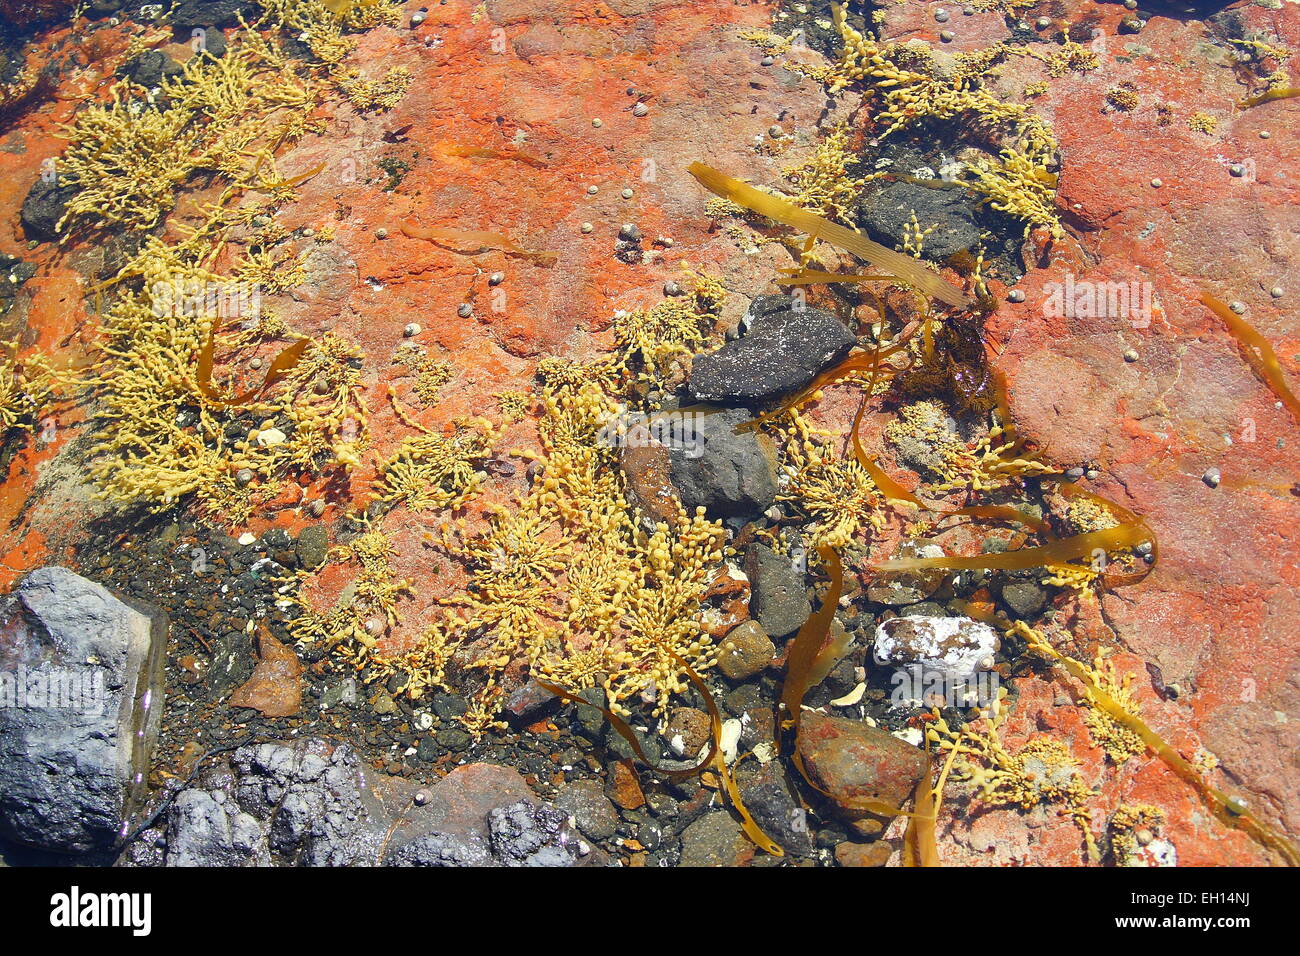 Sea plant and seaweed near shallow water at the beach Stock Photo